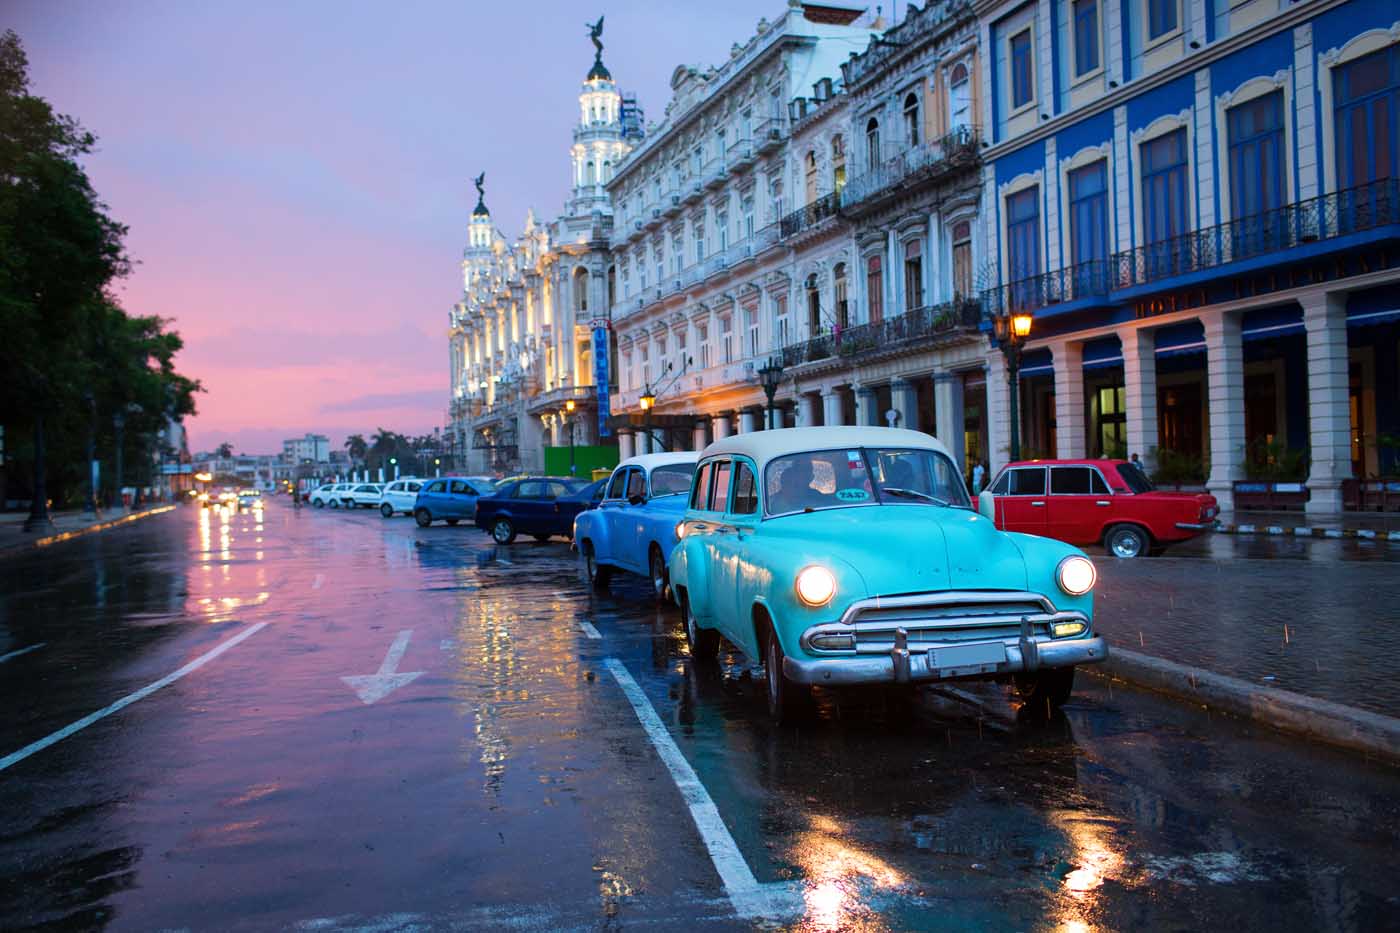 Longing To Finally Visit The Cuba Of My Dreams | HuffPost